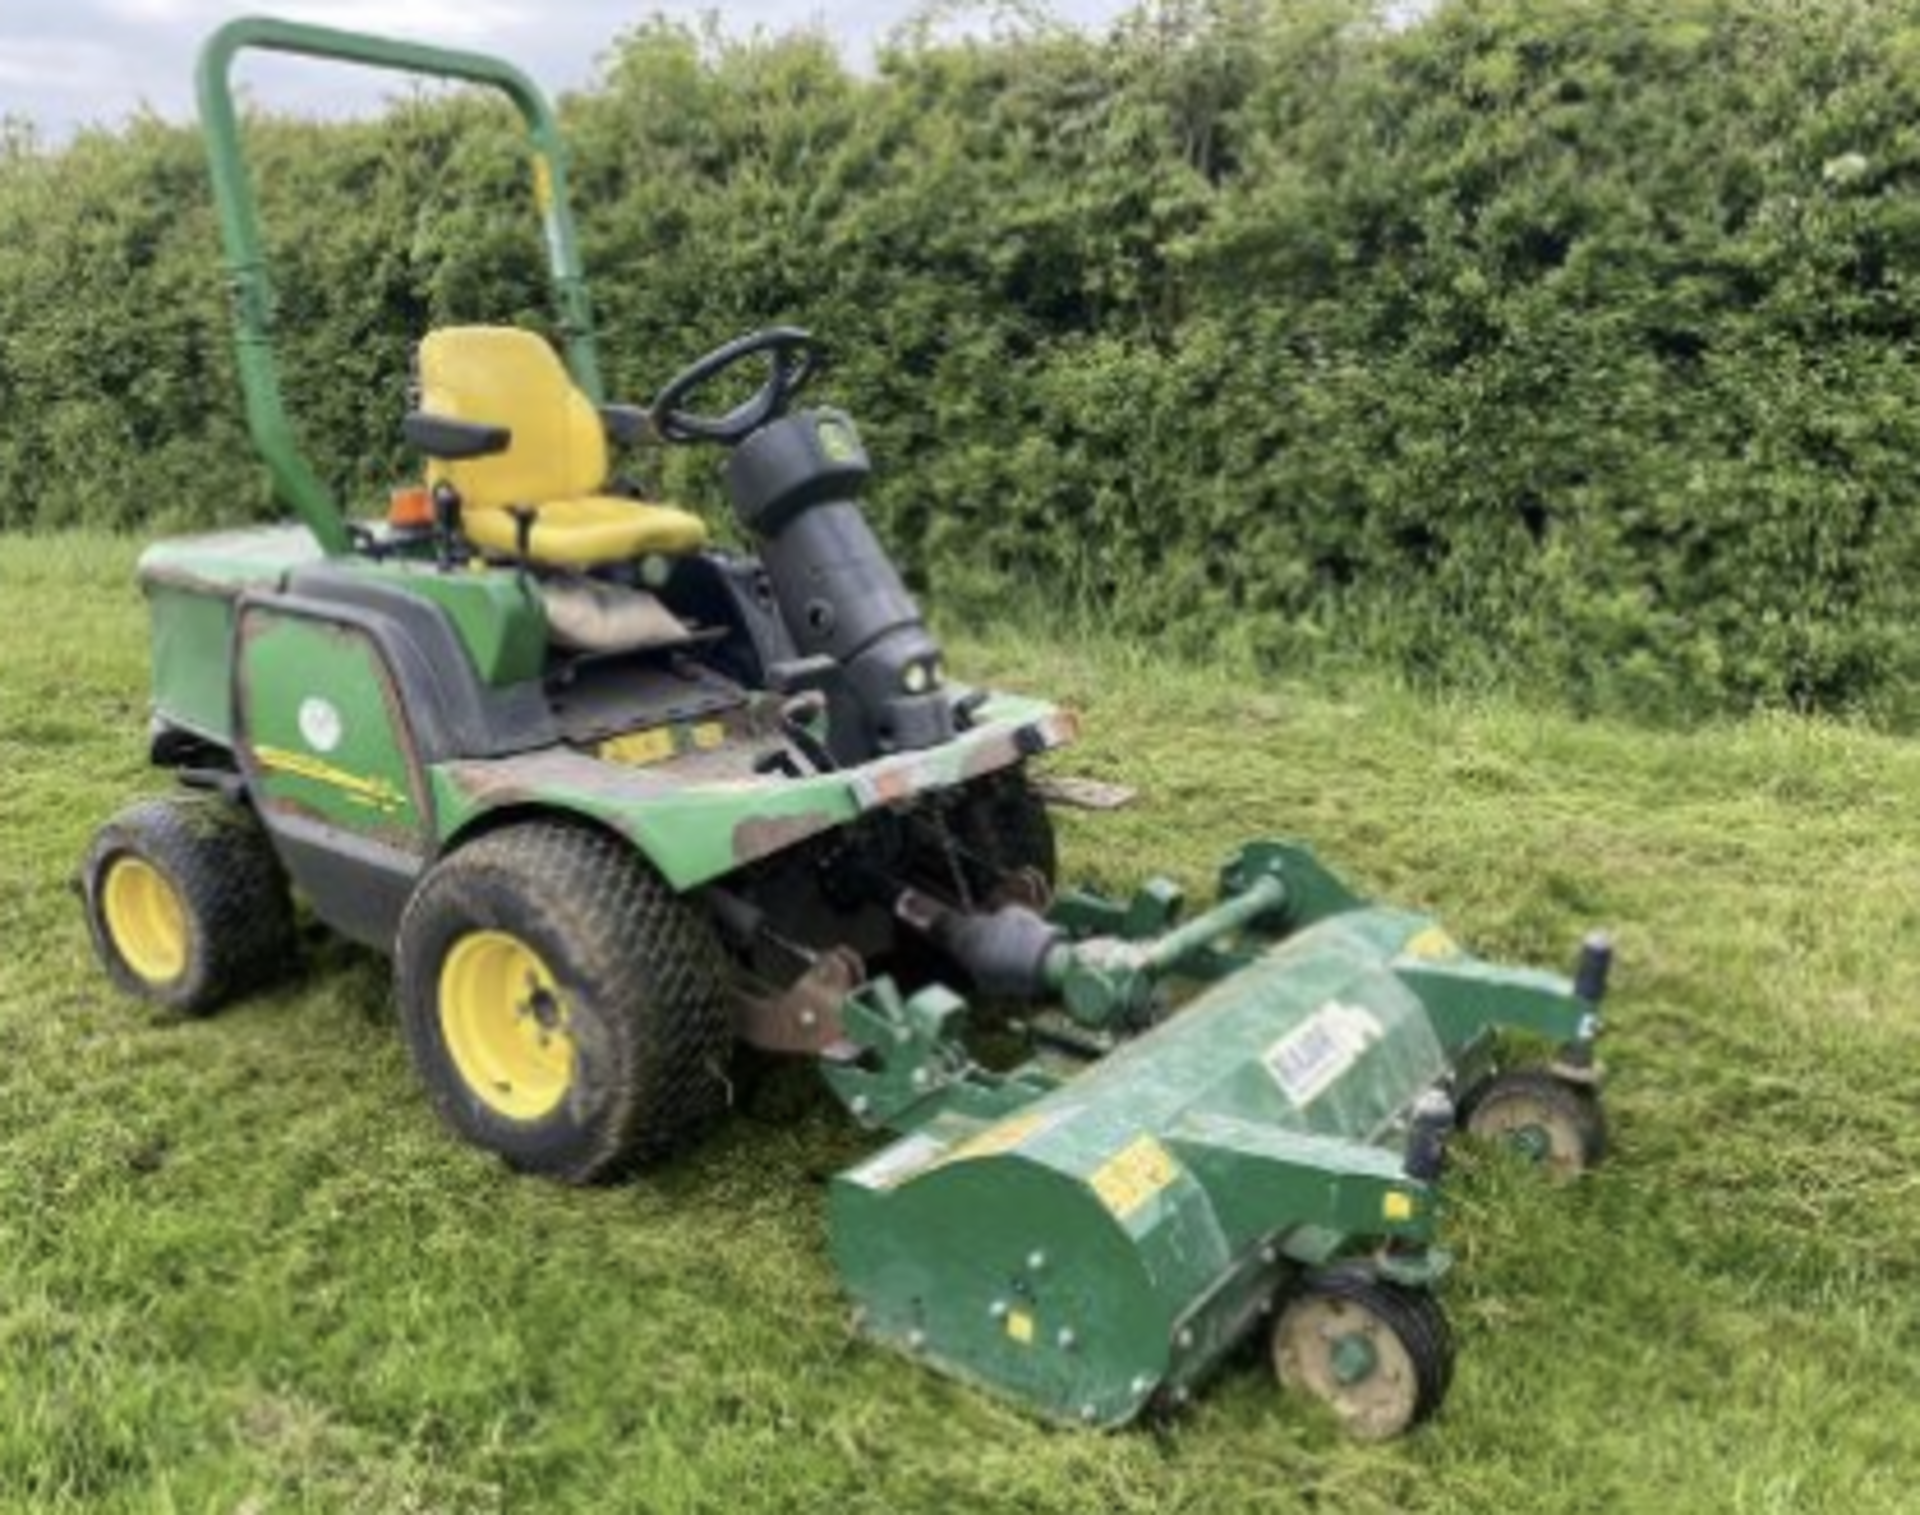 JOHN DEERE 1545 FRONT FLAIL MOWER.YEAR 2012. 1 OWNER FROM NEW. HOURS 2900. LOCATION NORTH YORKSHIRE. - Image 3 of 6